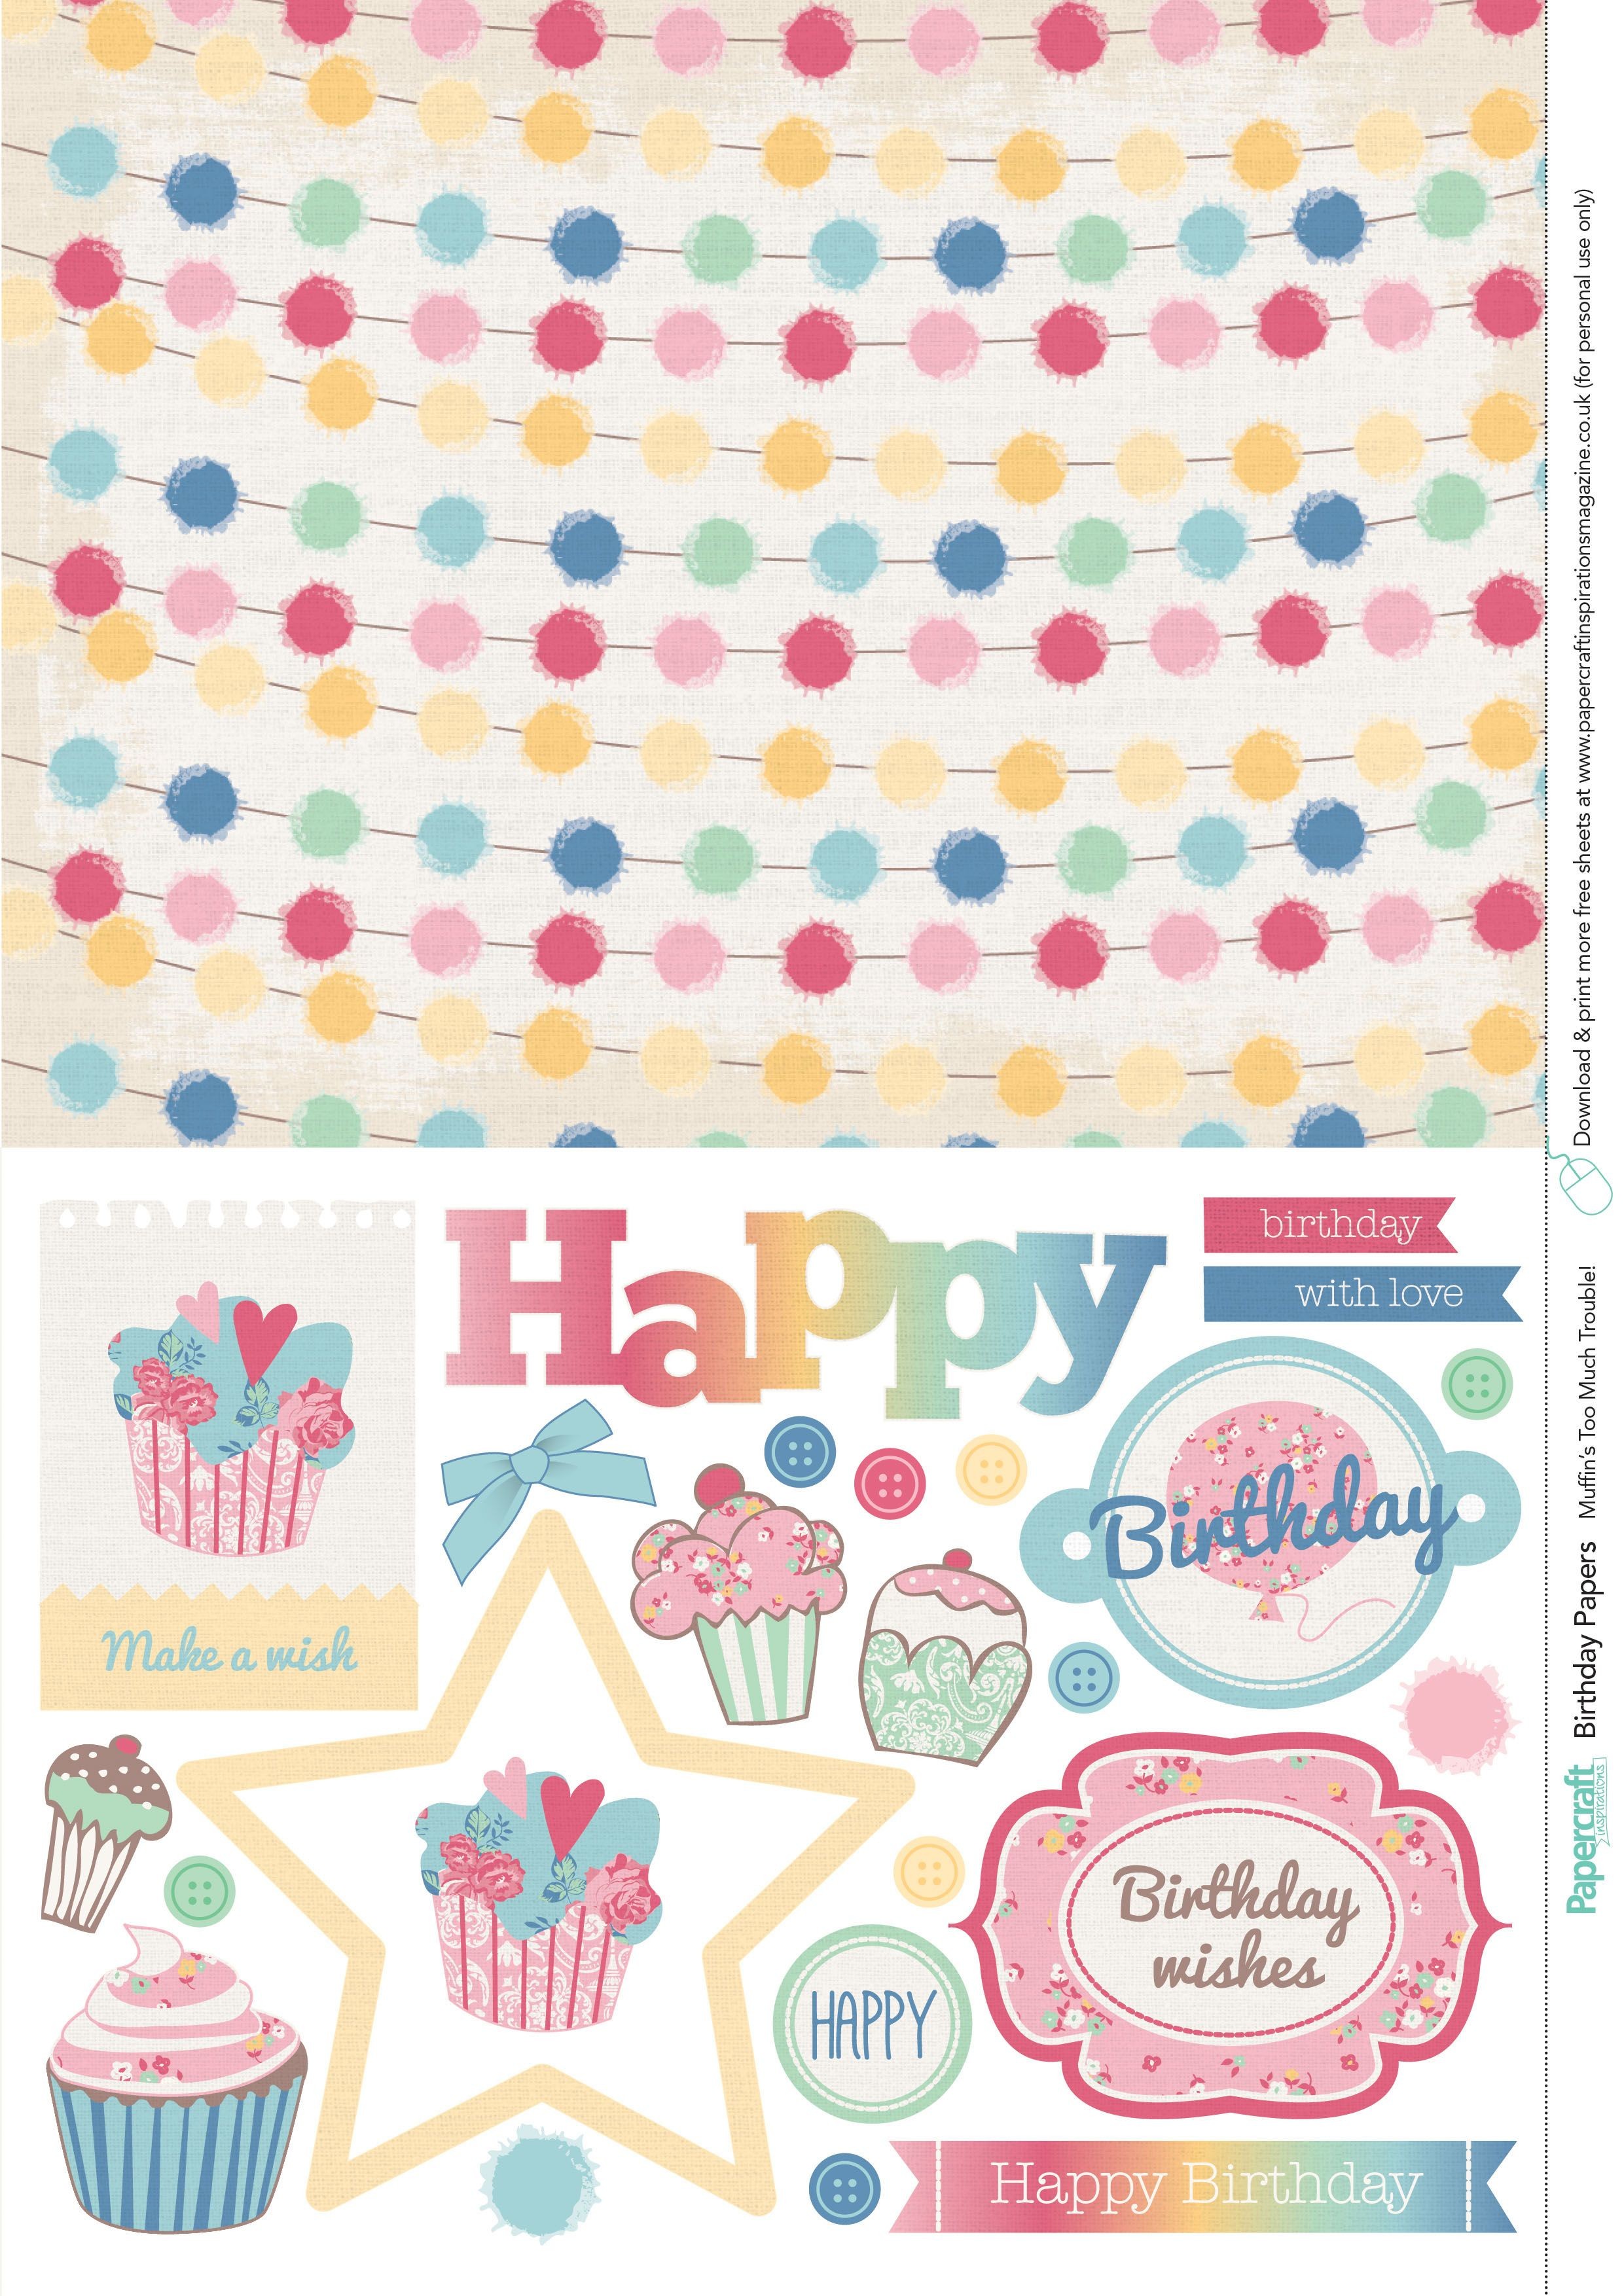 Happy Birthday Papercraft Birthday Free Printable Papers From Papercraft Inspirations 151